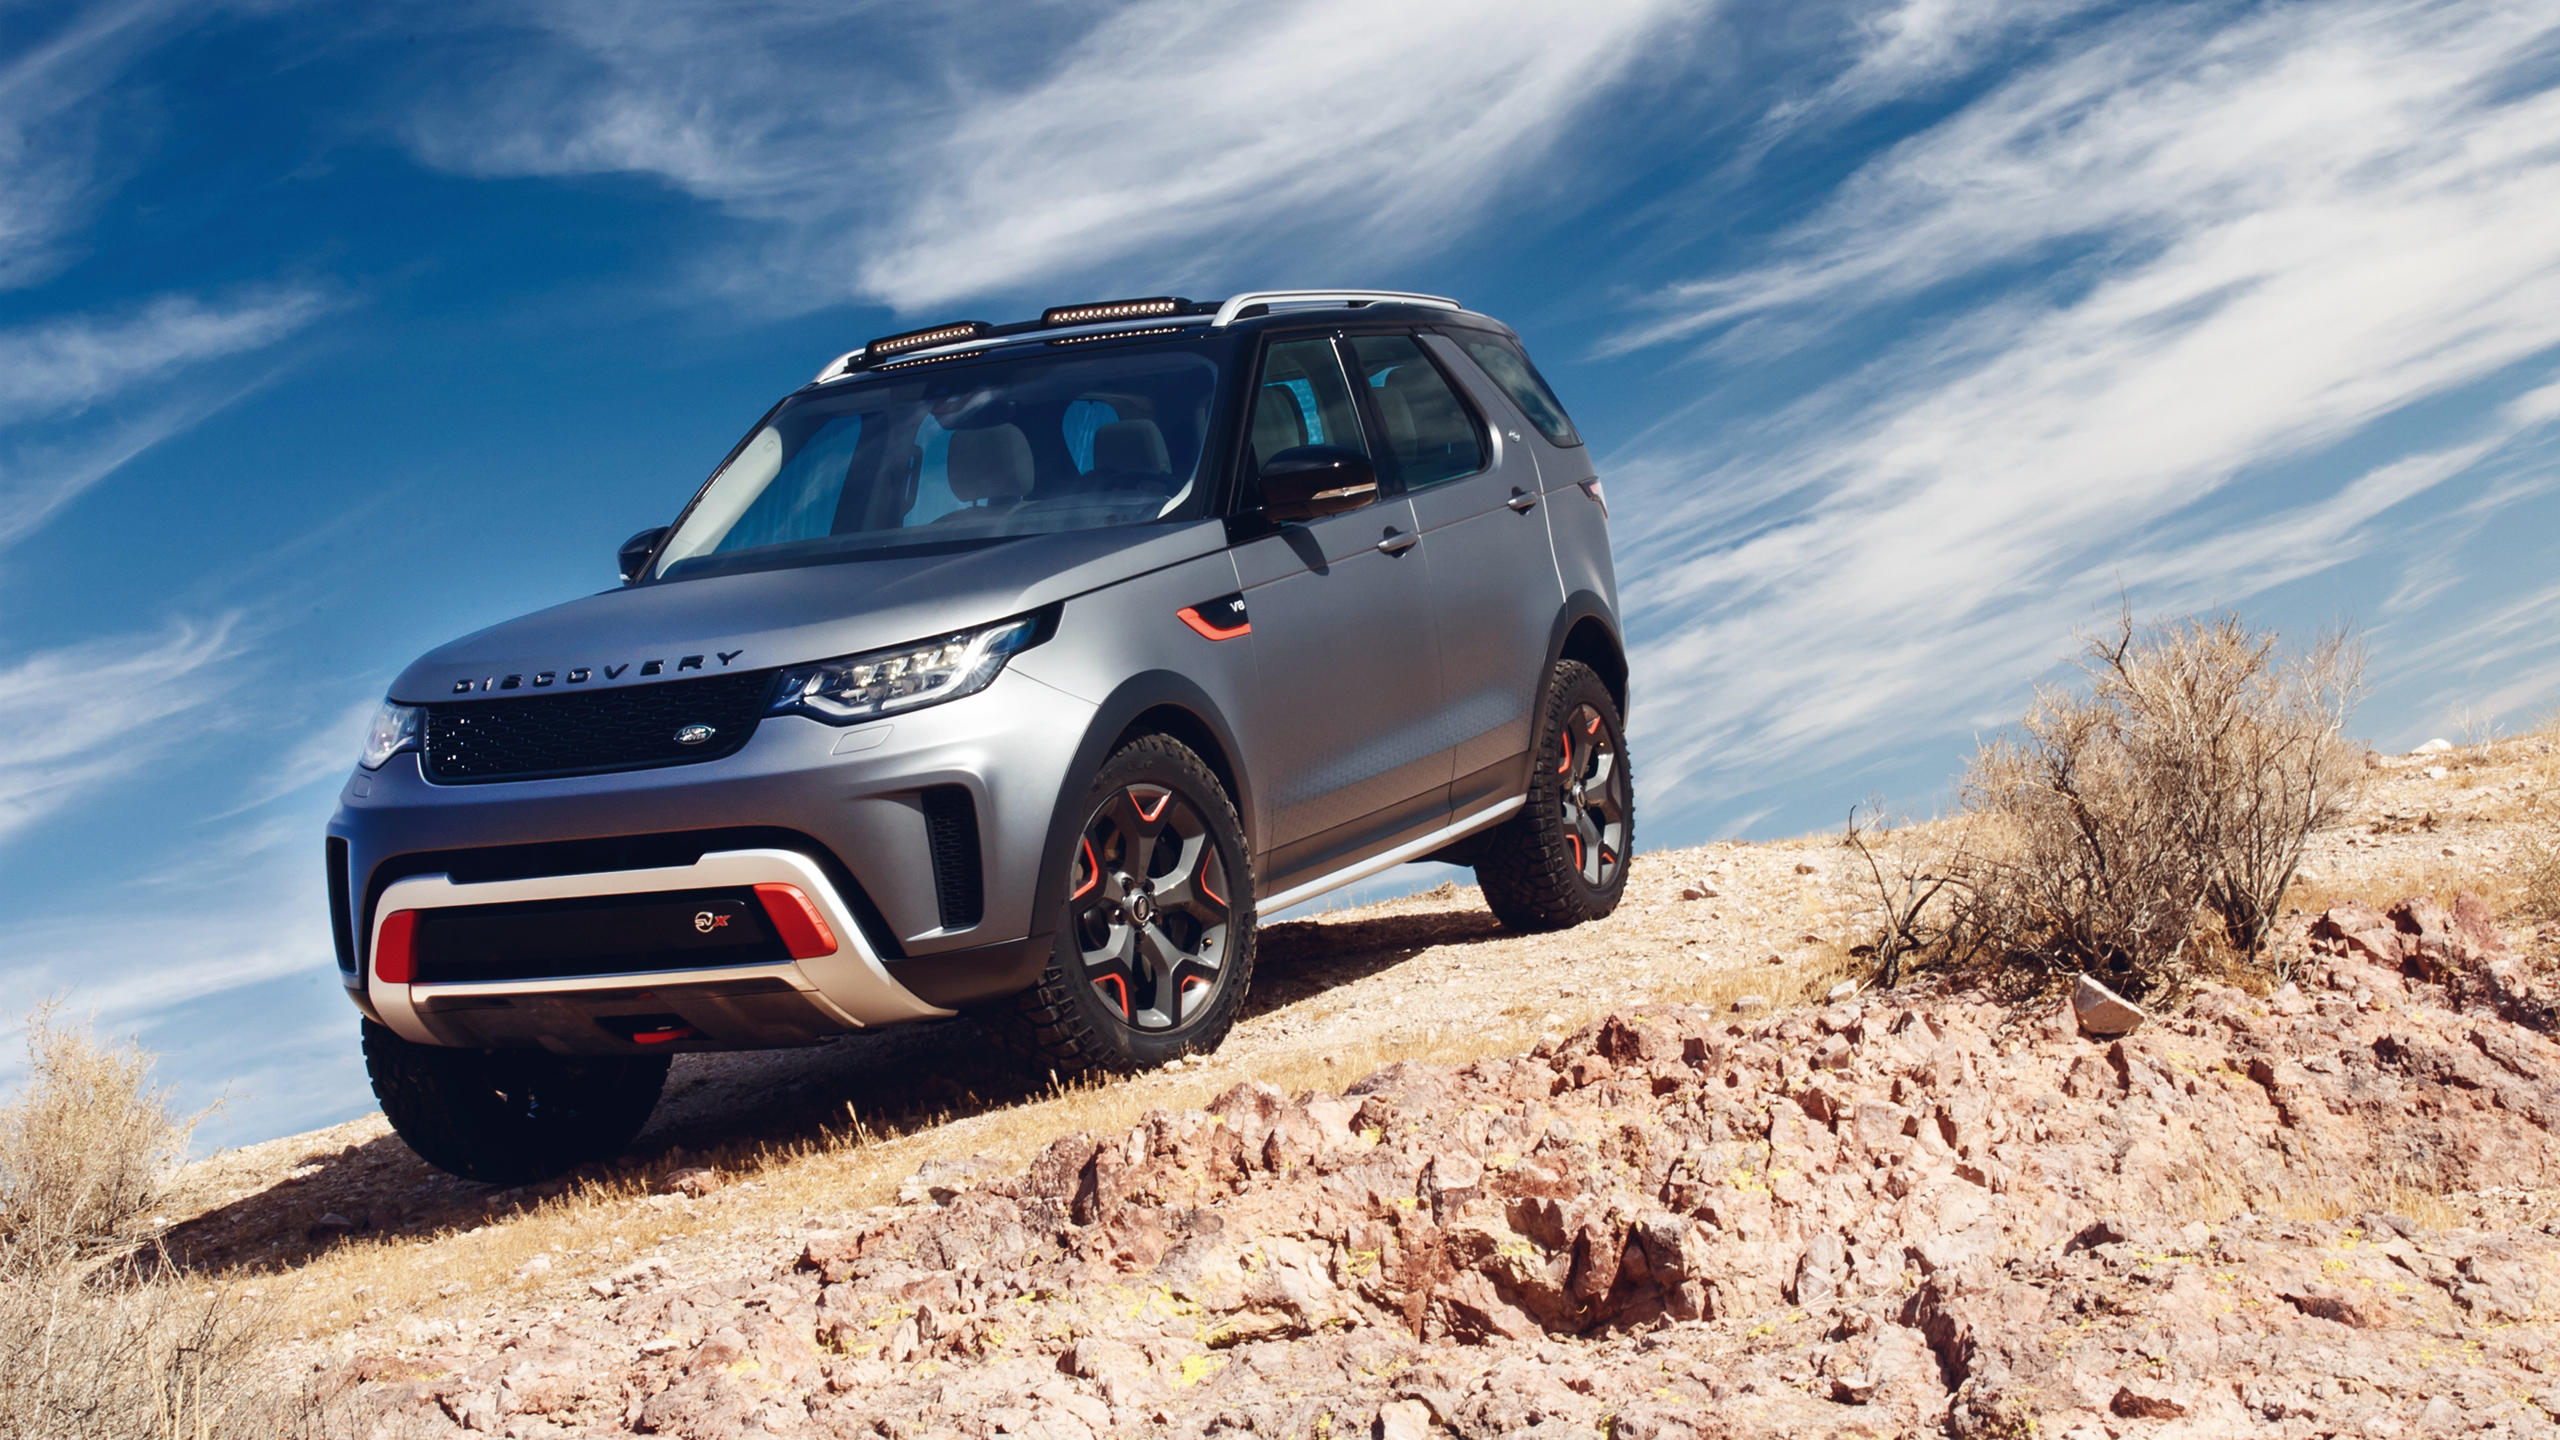 35+] Land Rover Discovery Wallpapers - WallpaperSafari